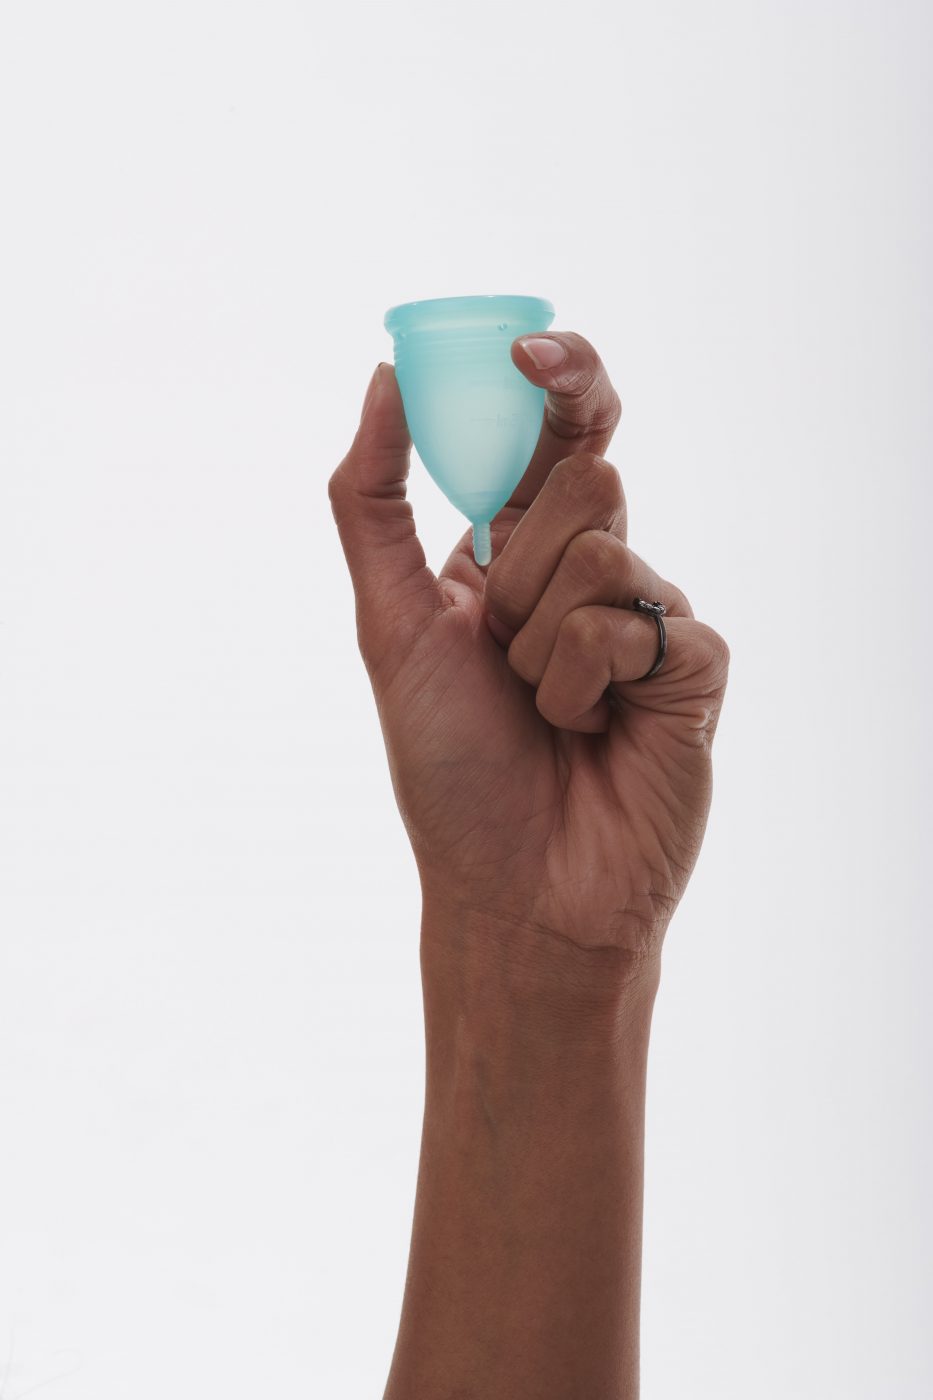 what is a menstrual cup